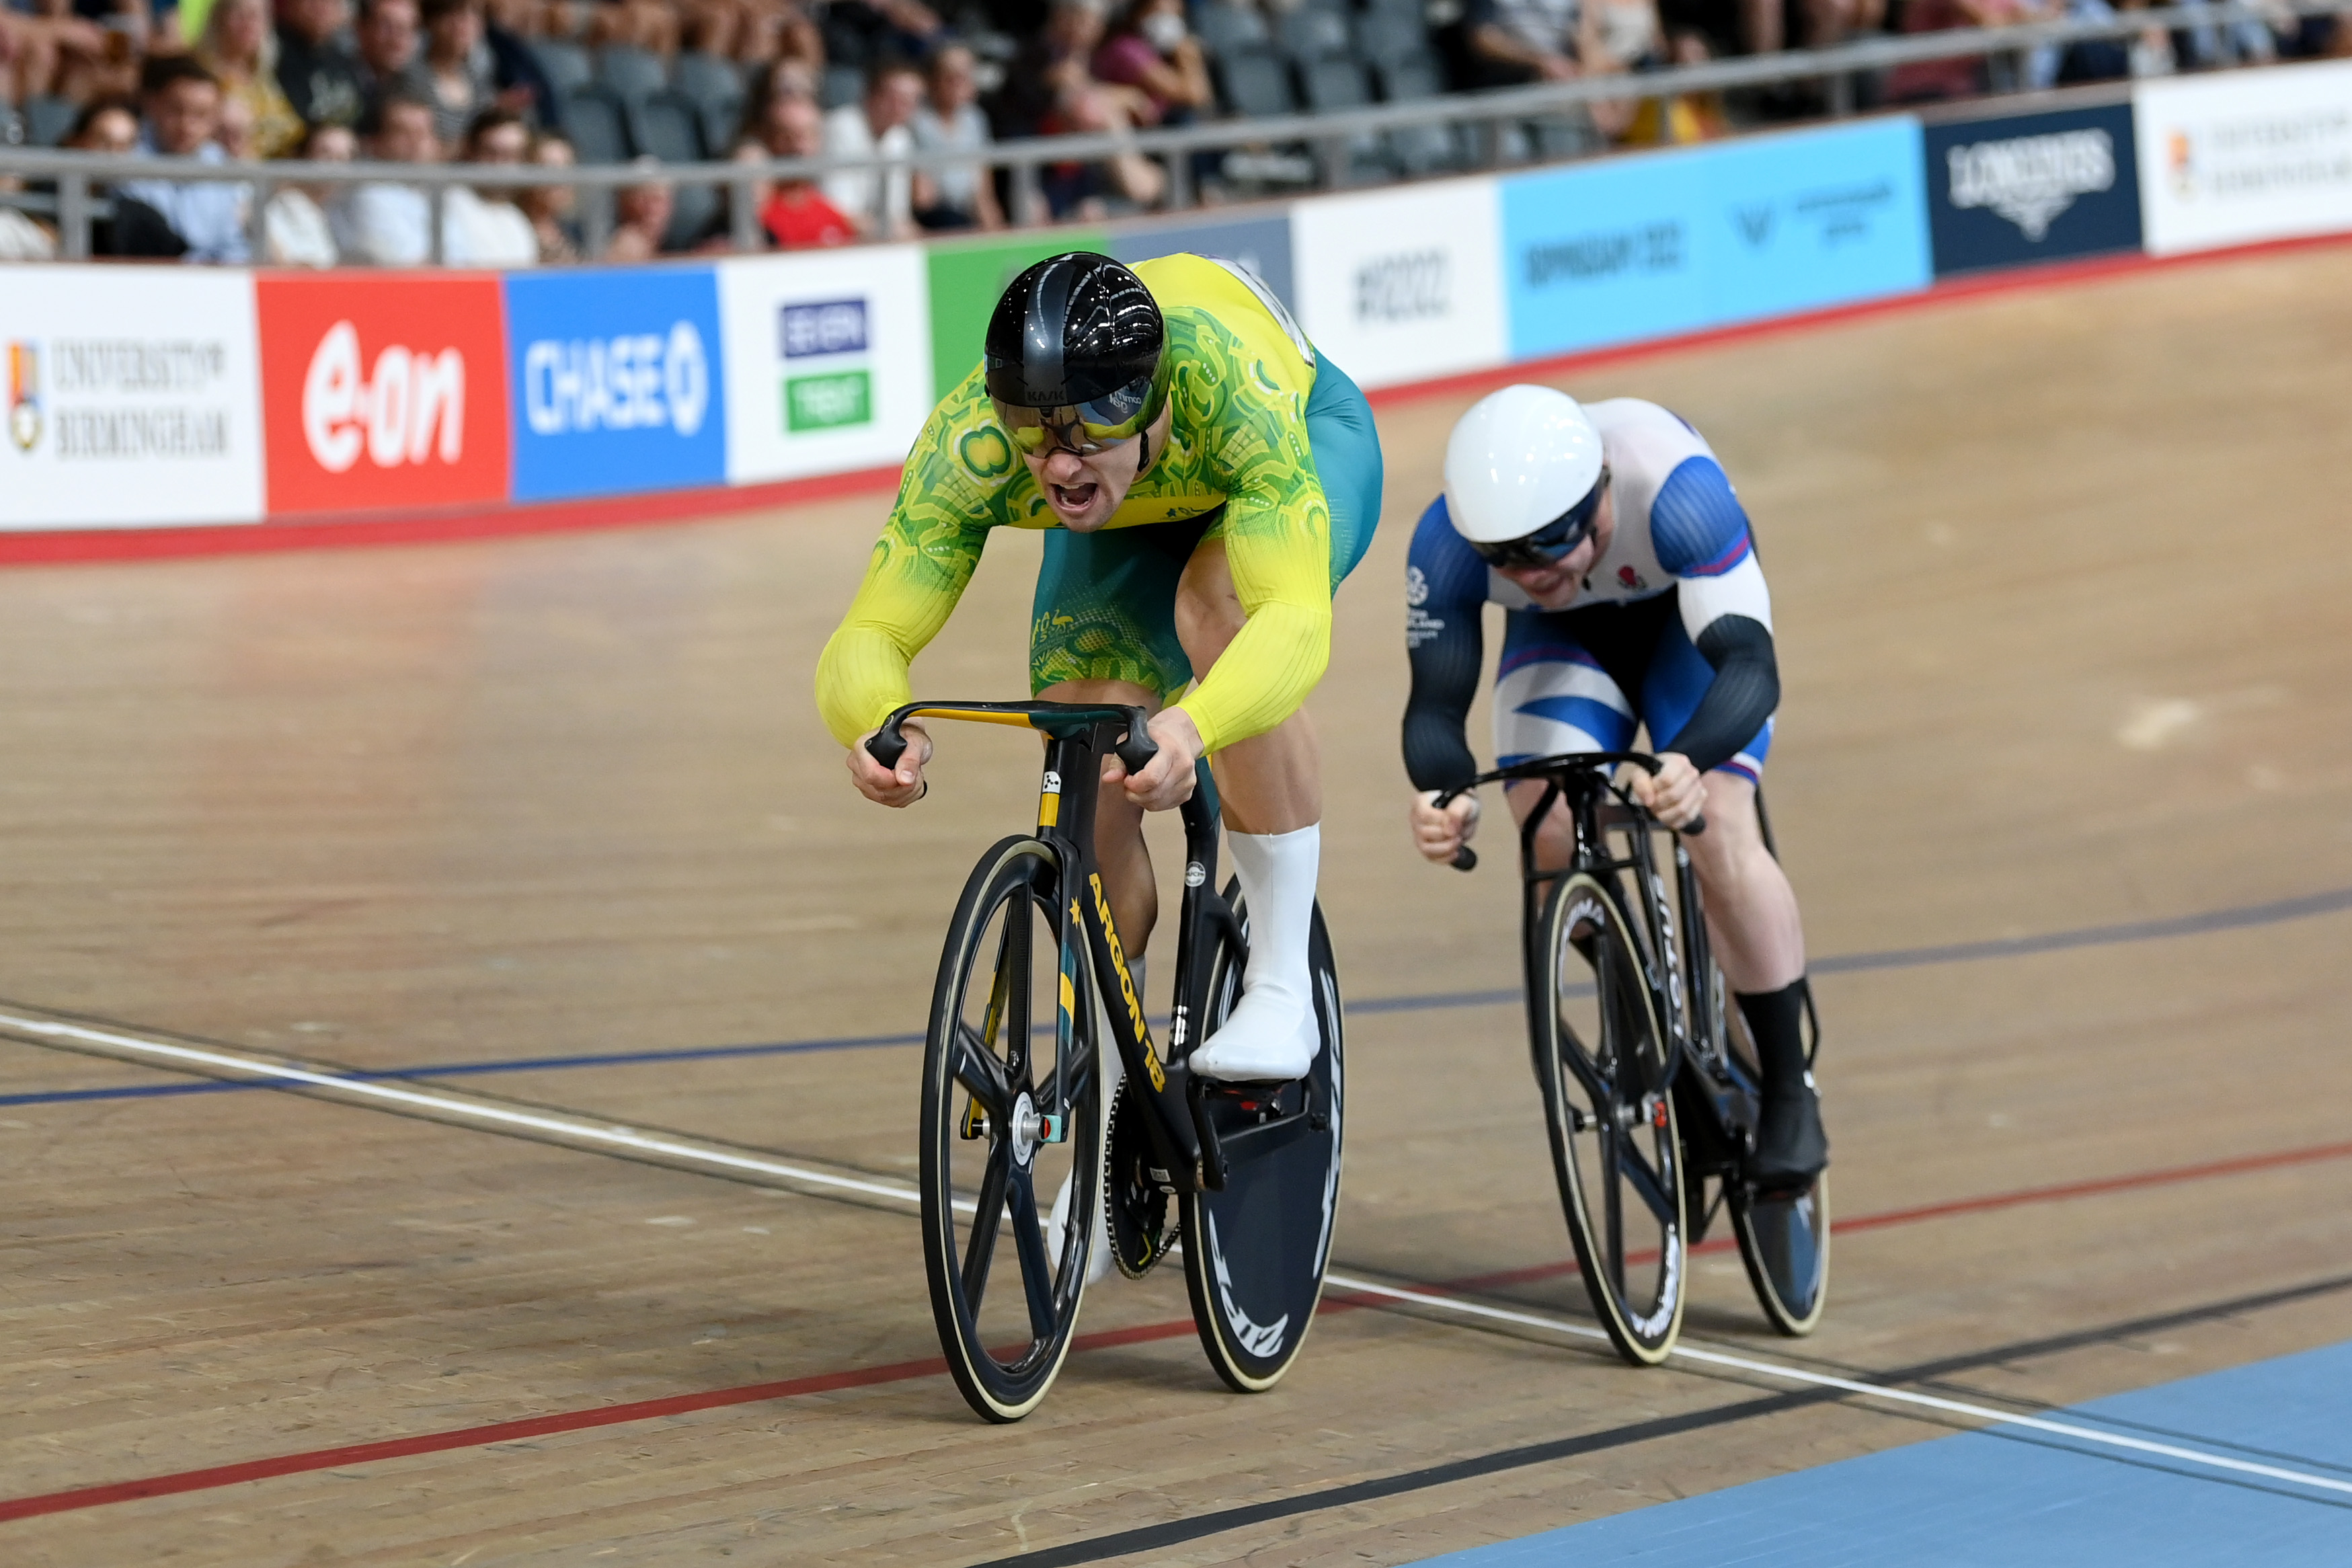 Matthew Glaetzer finishes ahead of Scotland's Jack Carlin in the third race of the men's sprint finals.